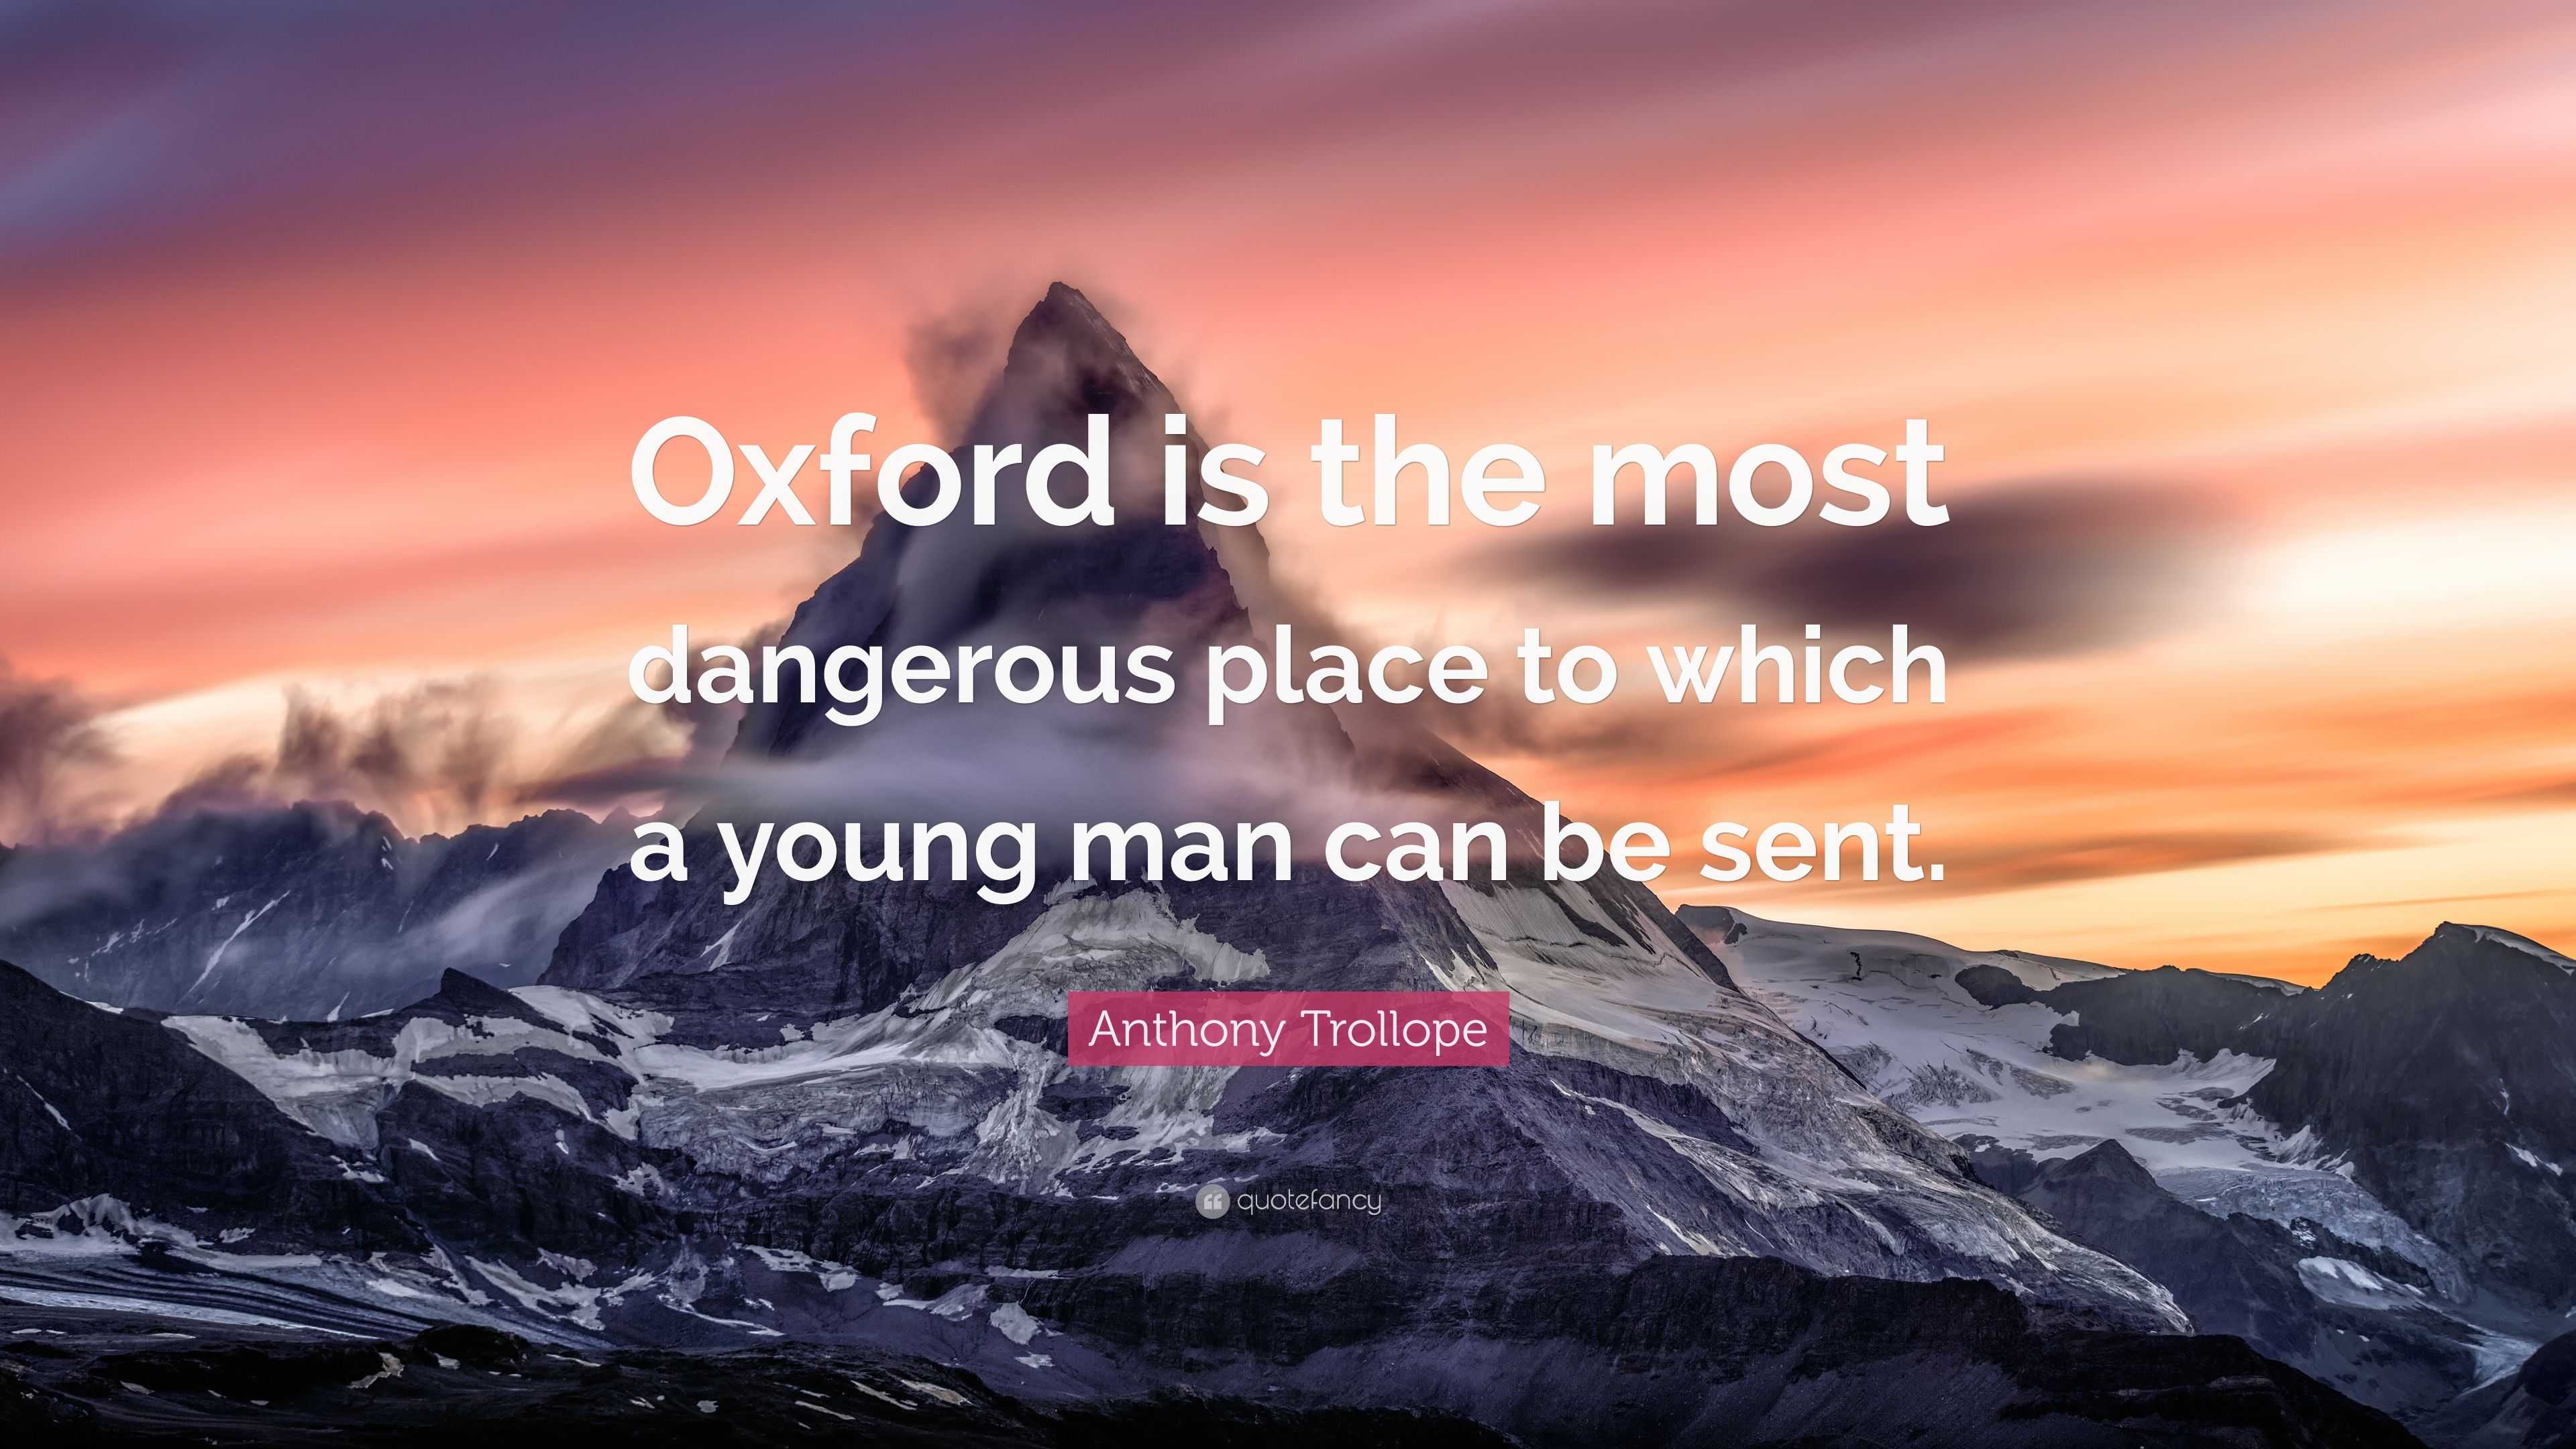 Anthony Trollope Quote: “Oxford is the most dangerous place to